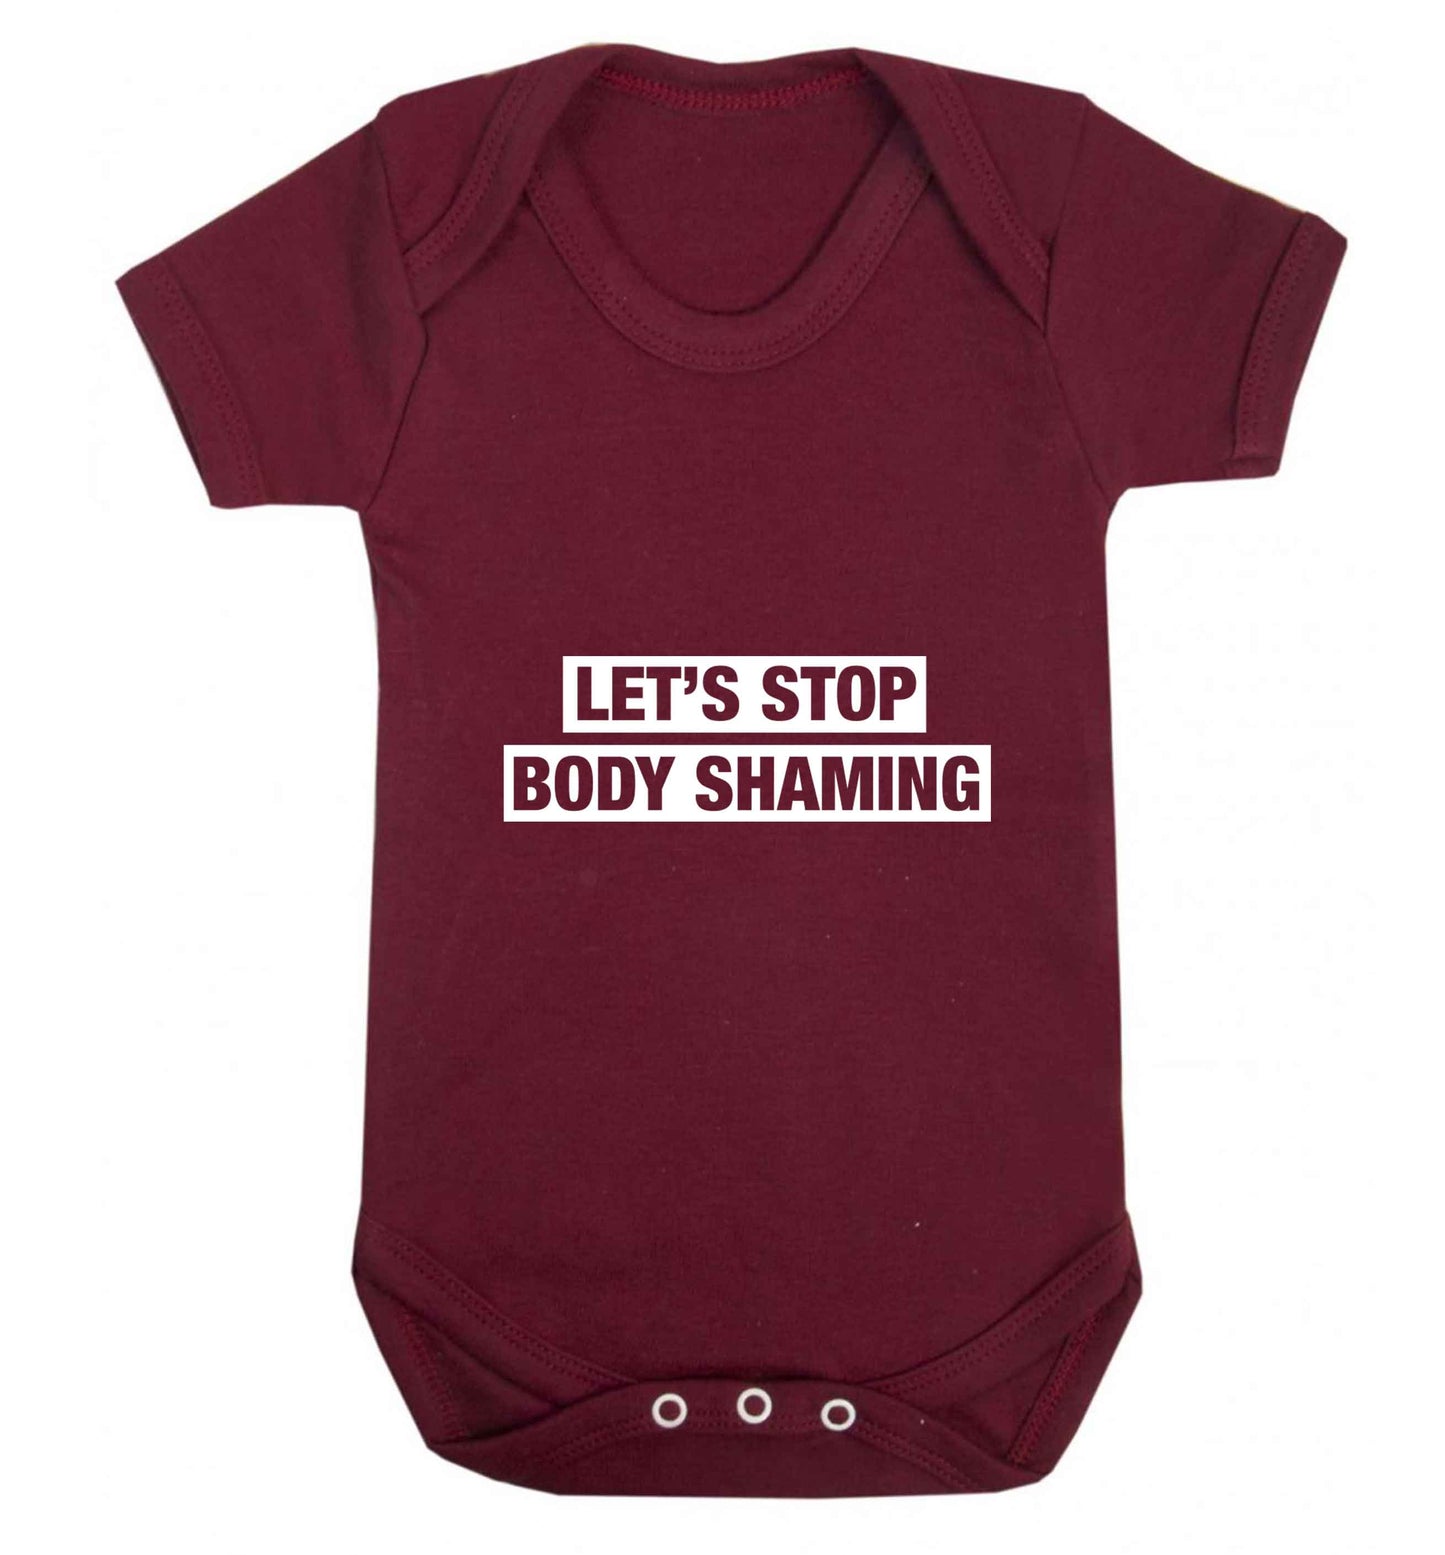 Let's stop body shaming baby vest maroon 18-24 months